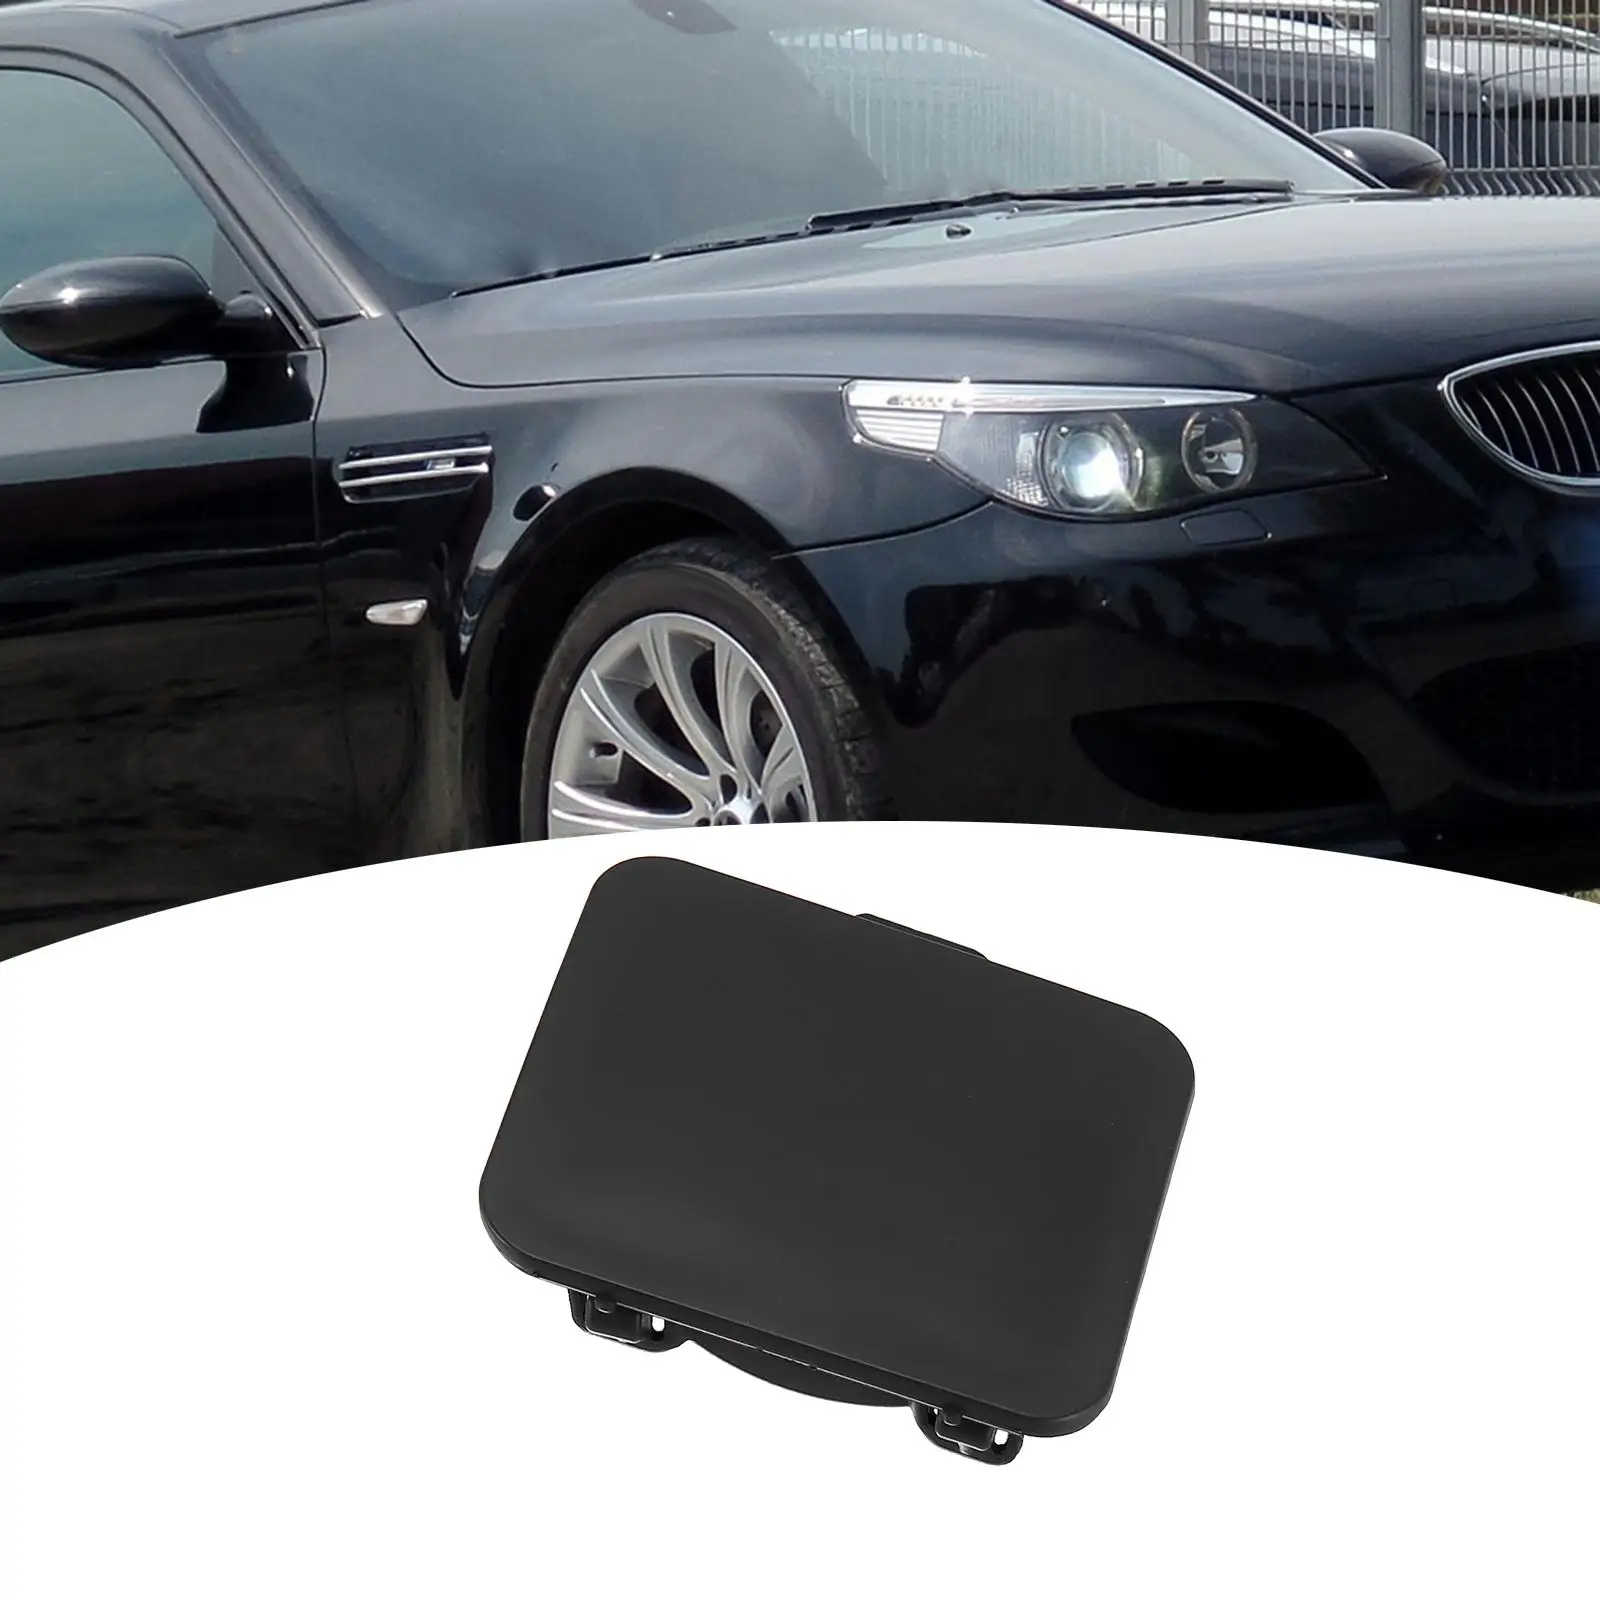 Front Bumper Tow Eye Hook Cover Cap Tow Hole Cover Replace 51117896585 51117897210 for BMW E60 M Sport 2003-2010 Accessory